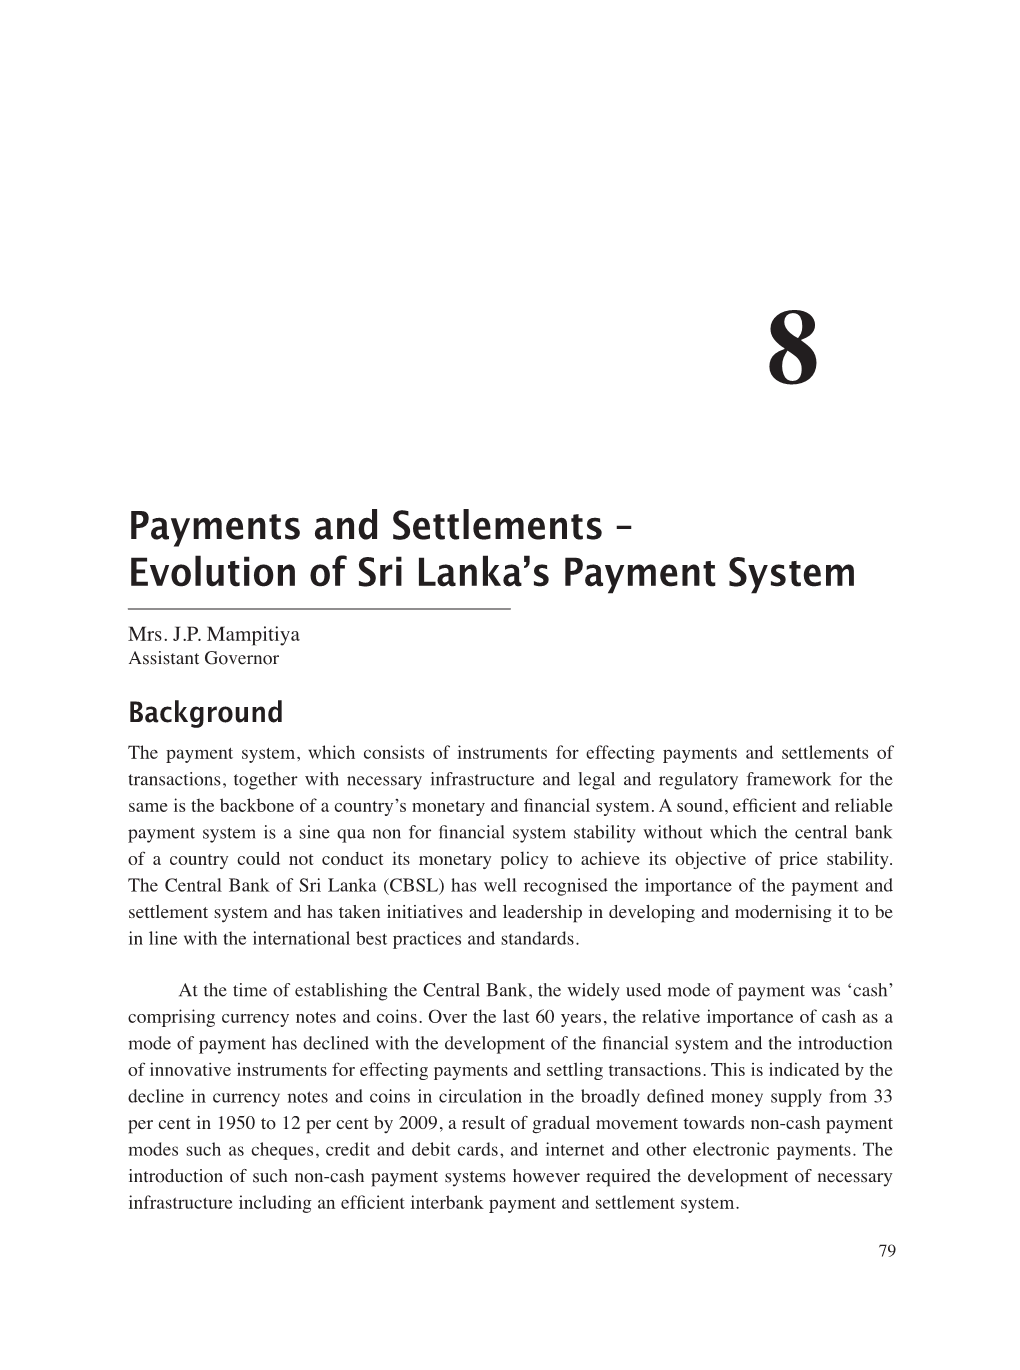 Payments and Settlements – Evolution of Sri Lanka's Payment System